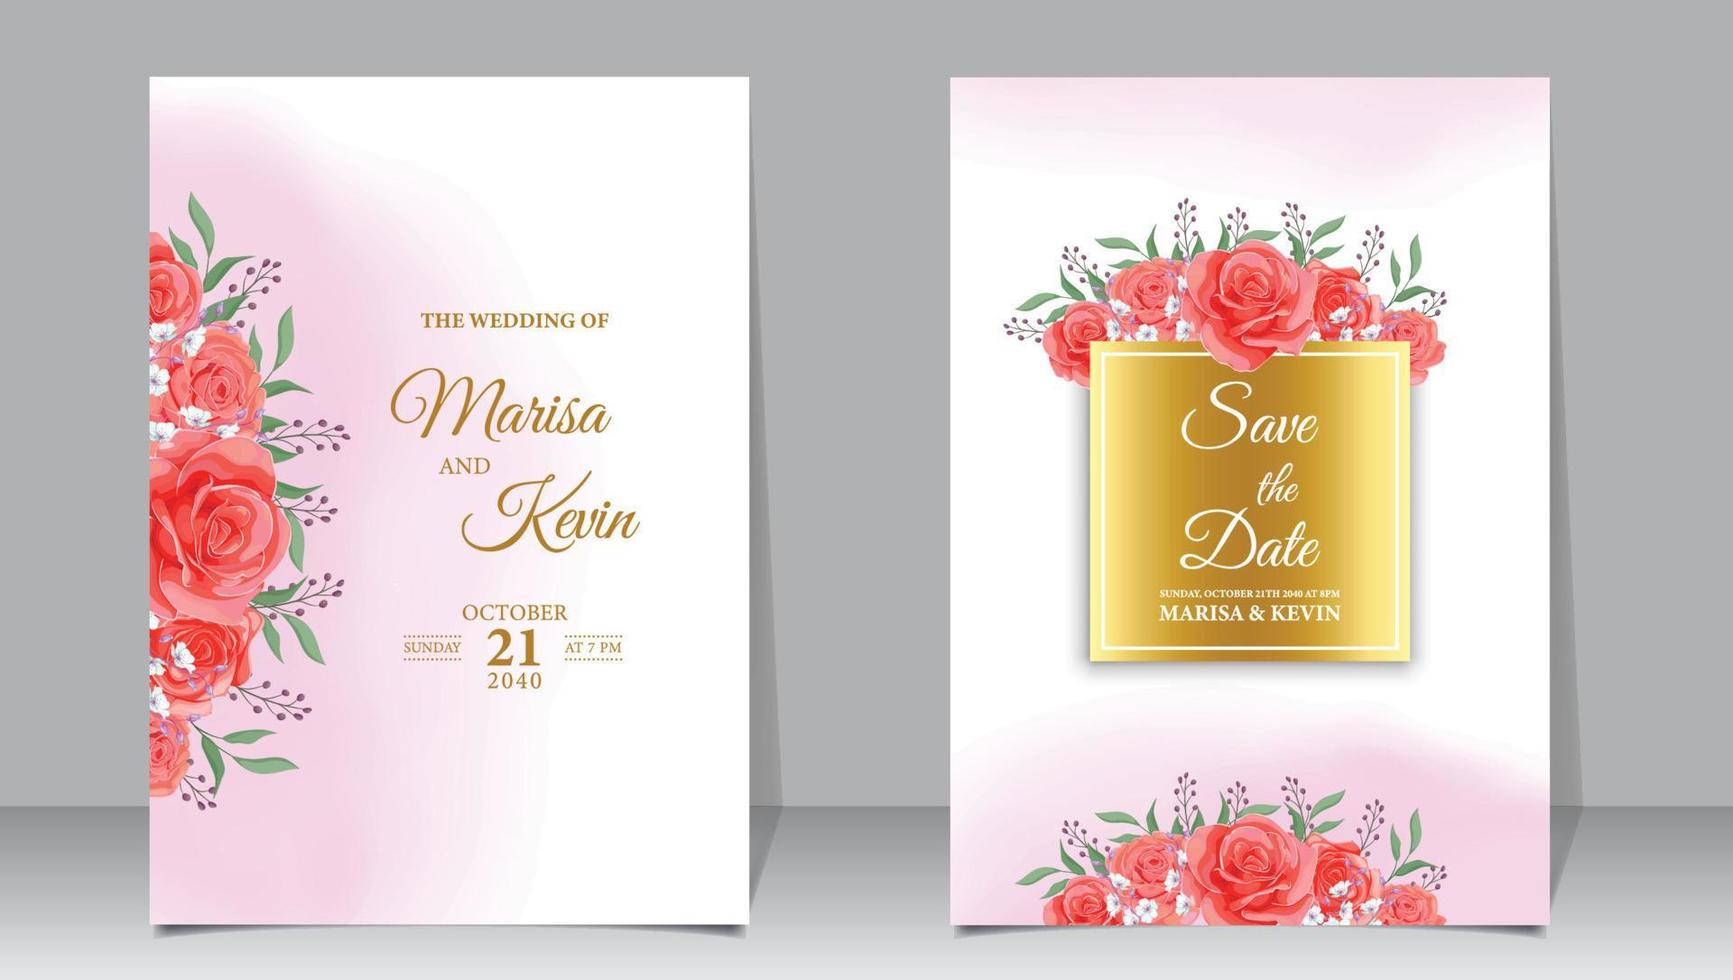 Luxury wedding invitation with red flowers and watercolor background vector